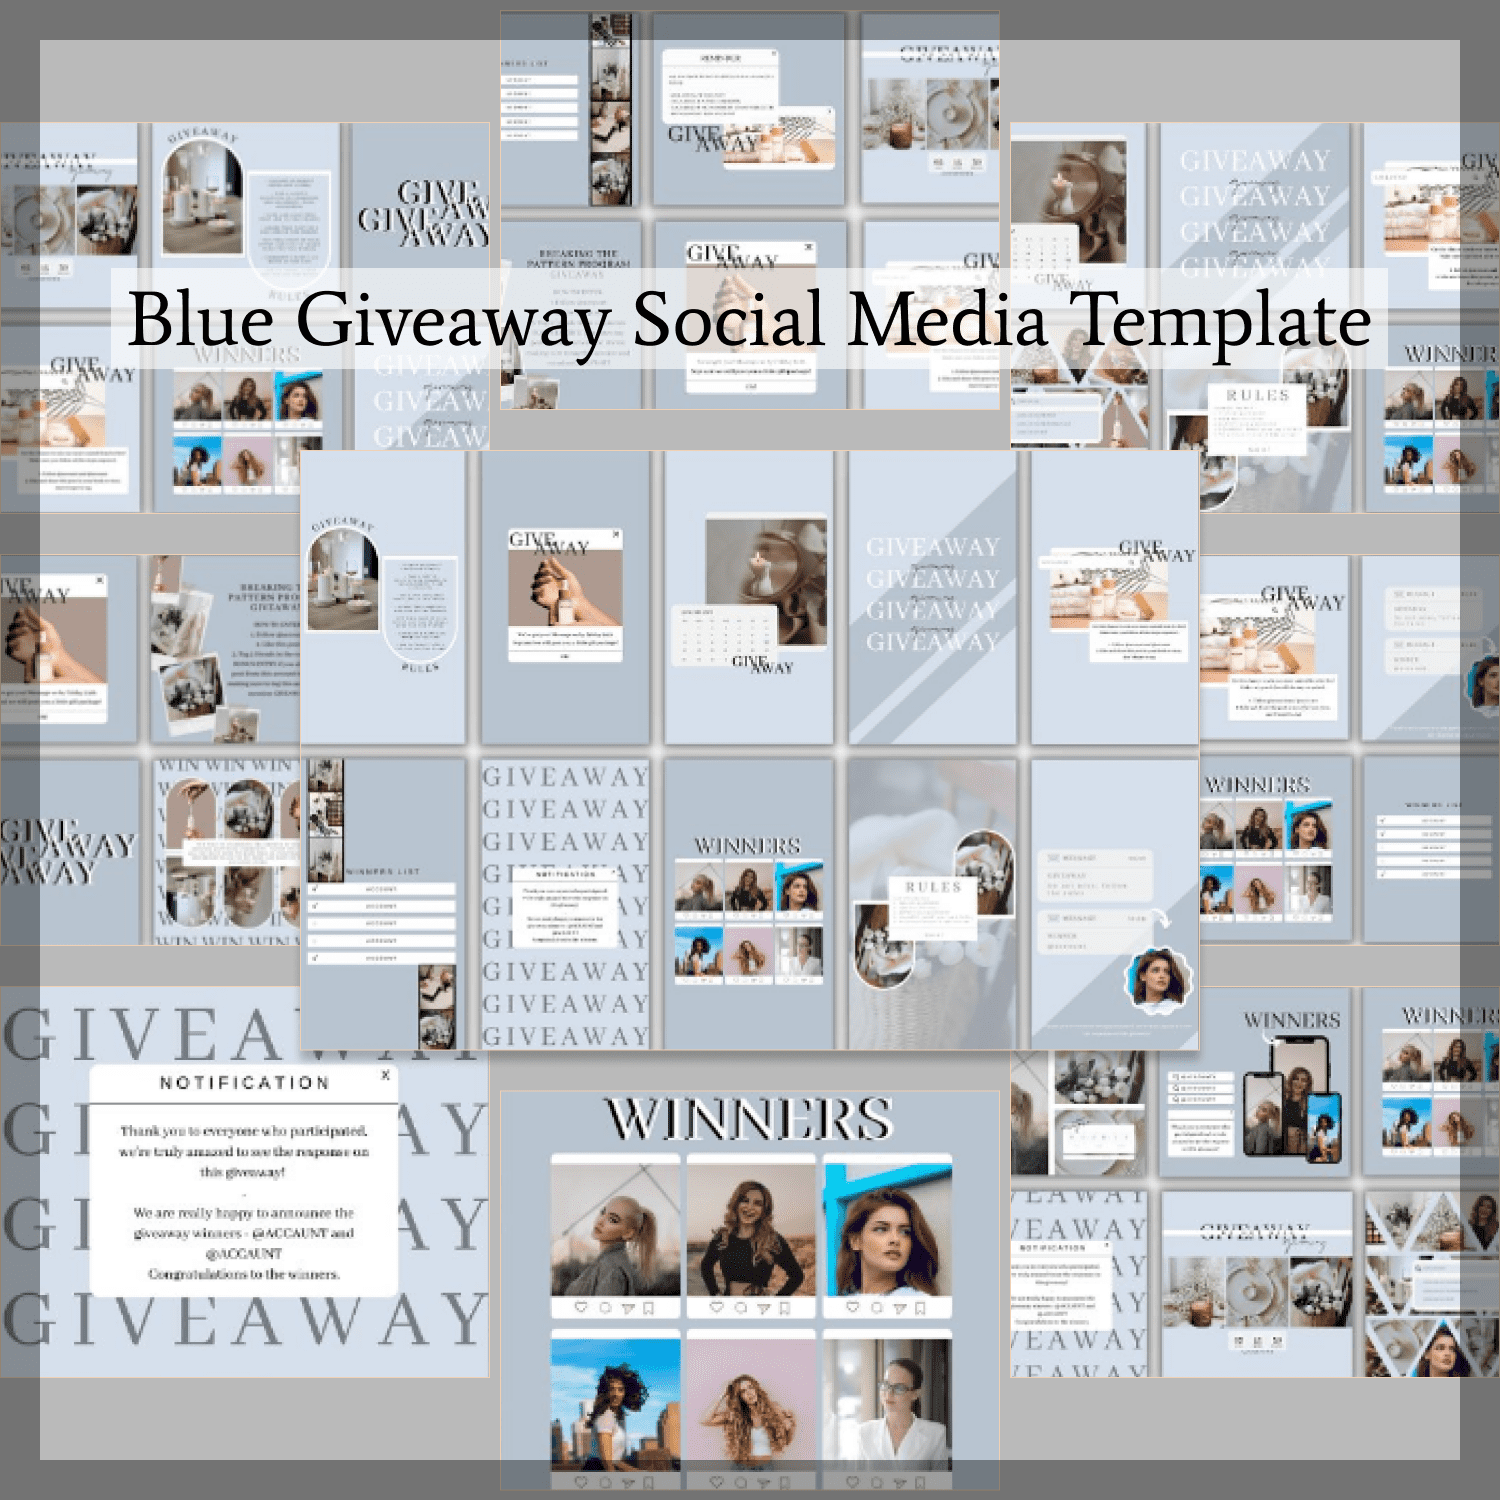 Blue Giveaway Social Media Template cover image.